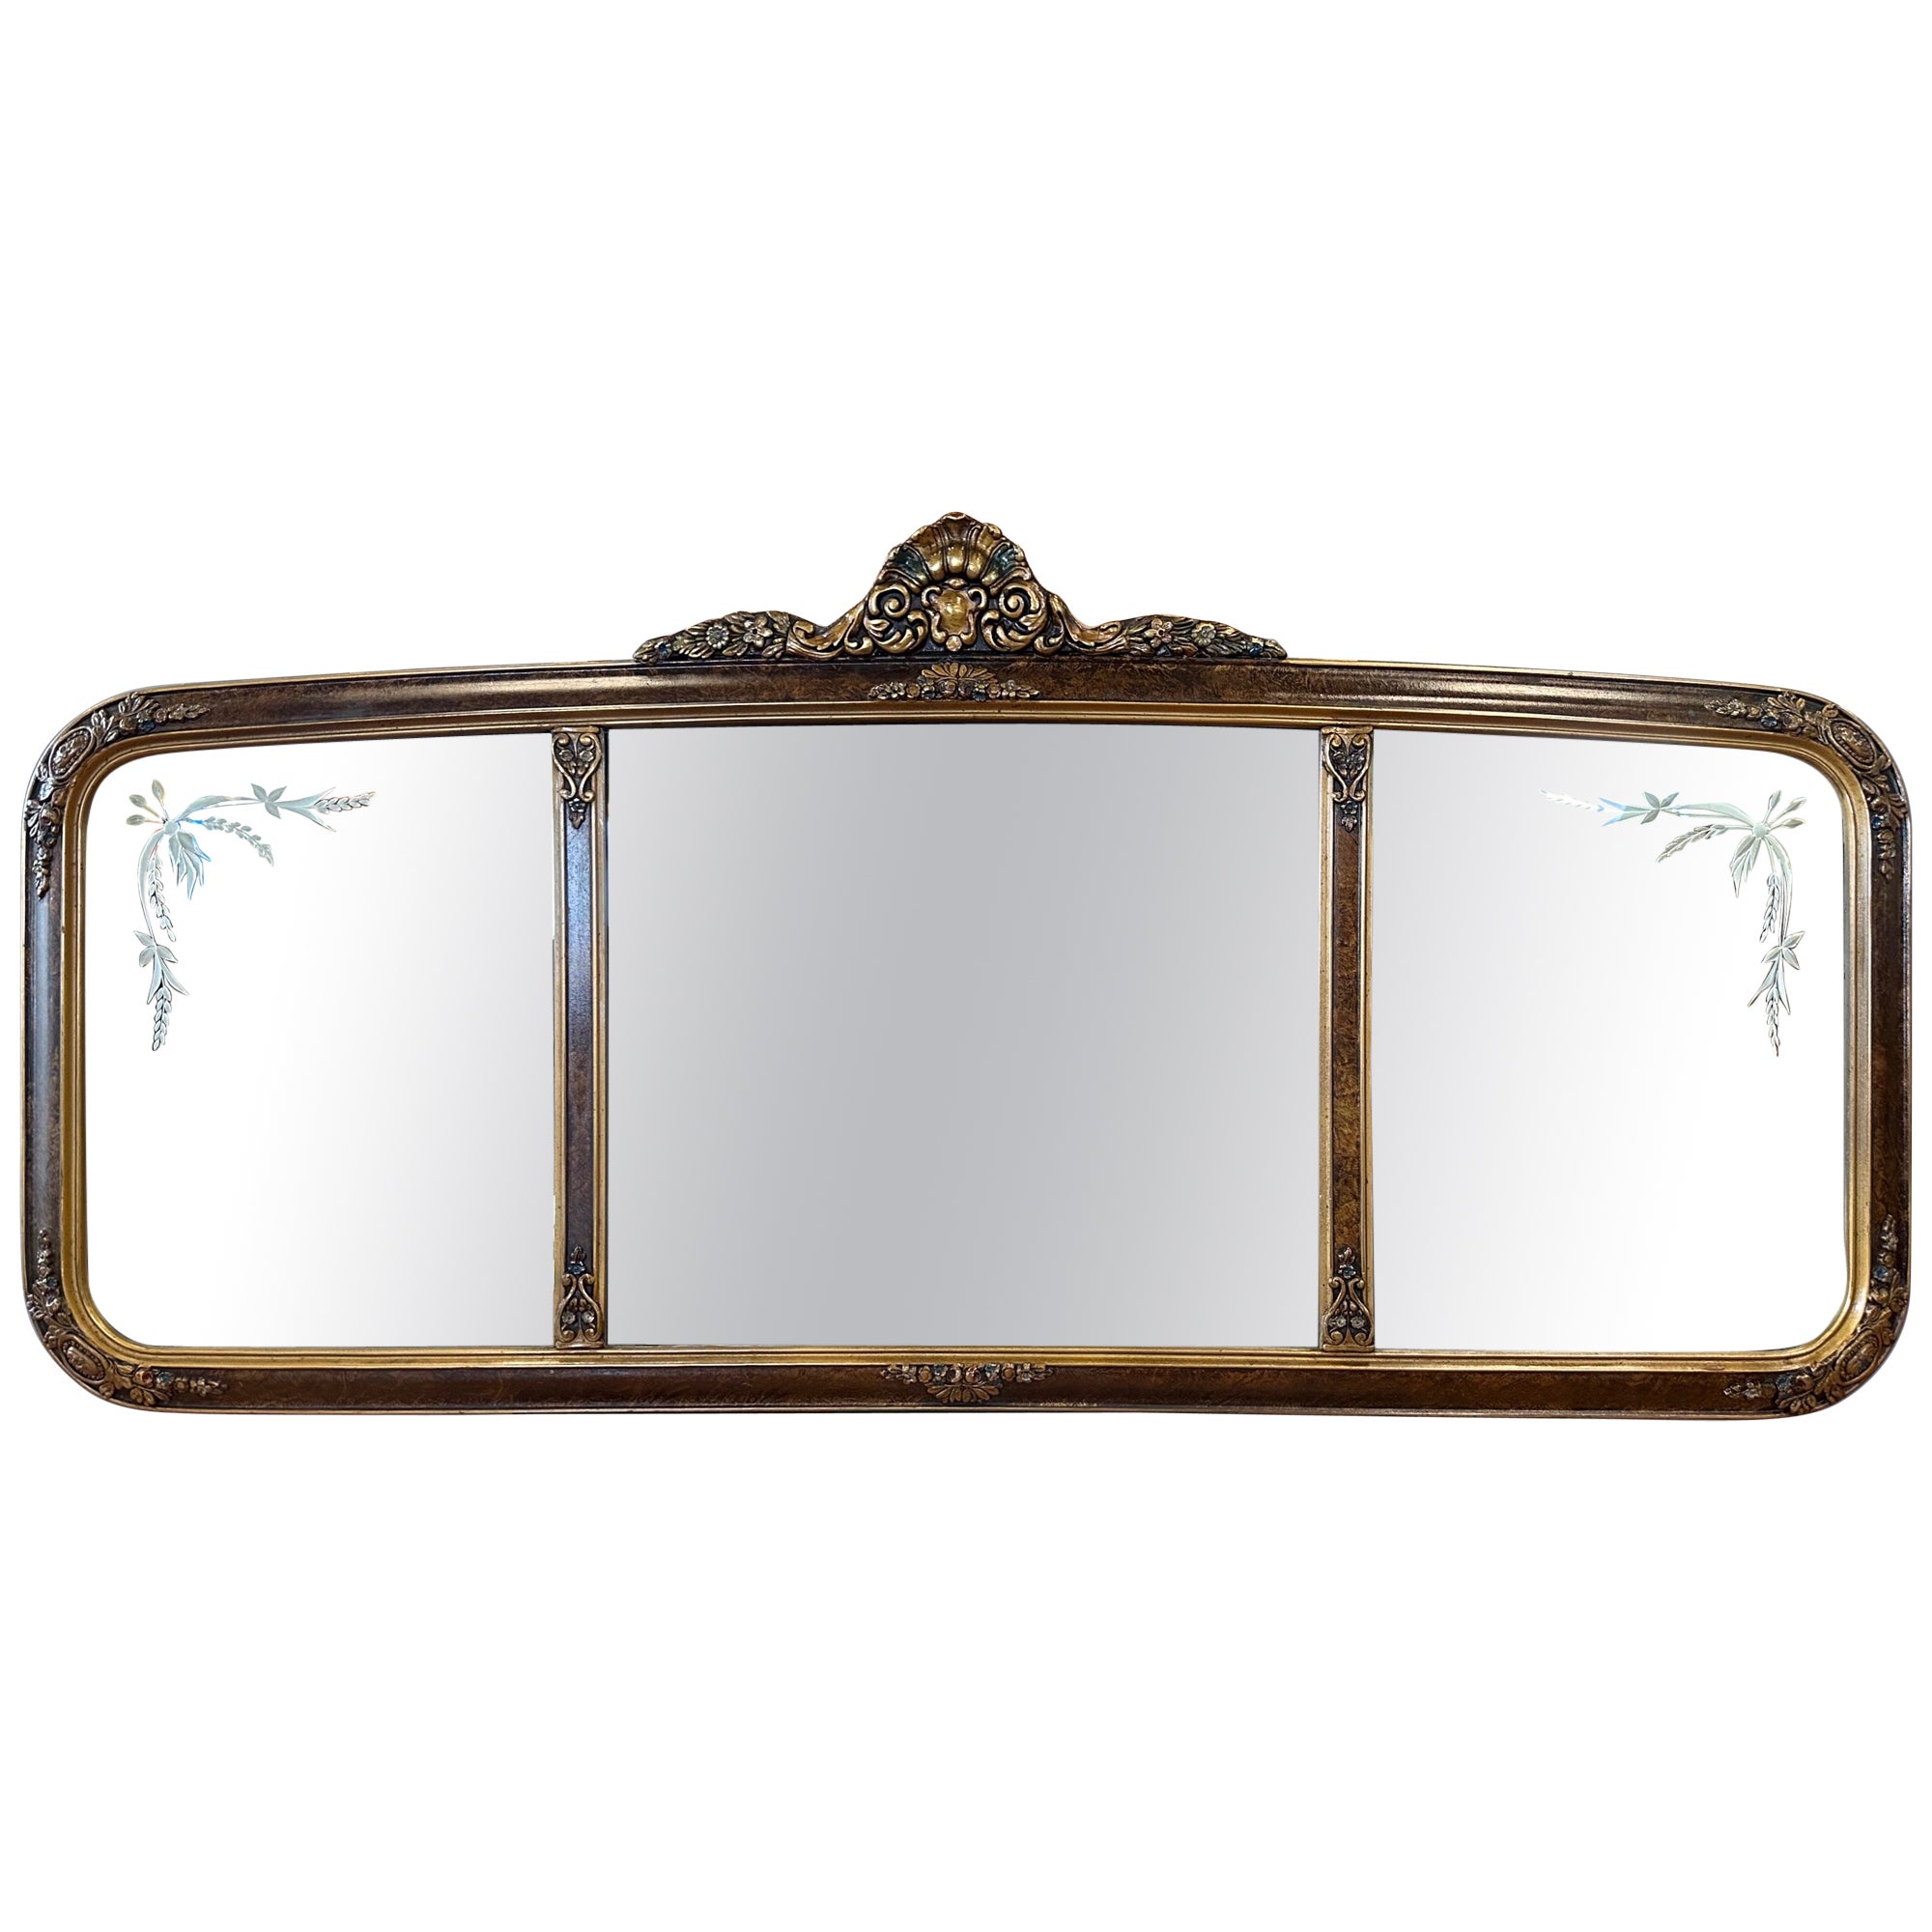 Edwardian Hand-Crafted and Painted Three-Panel Etched Glass Mantel Mirror, 1910 For Sale